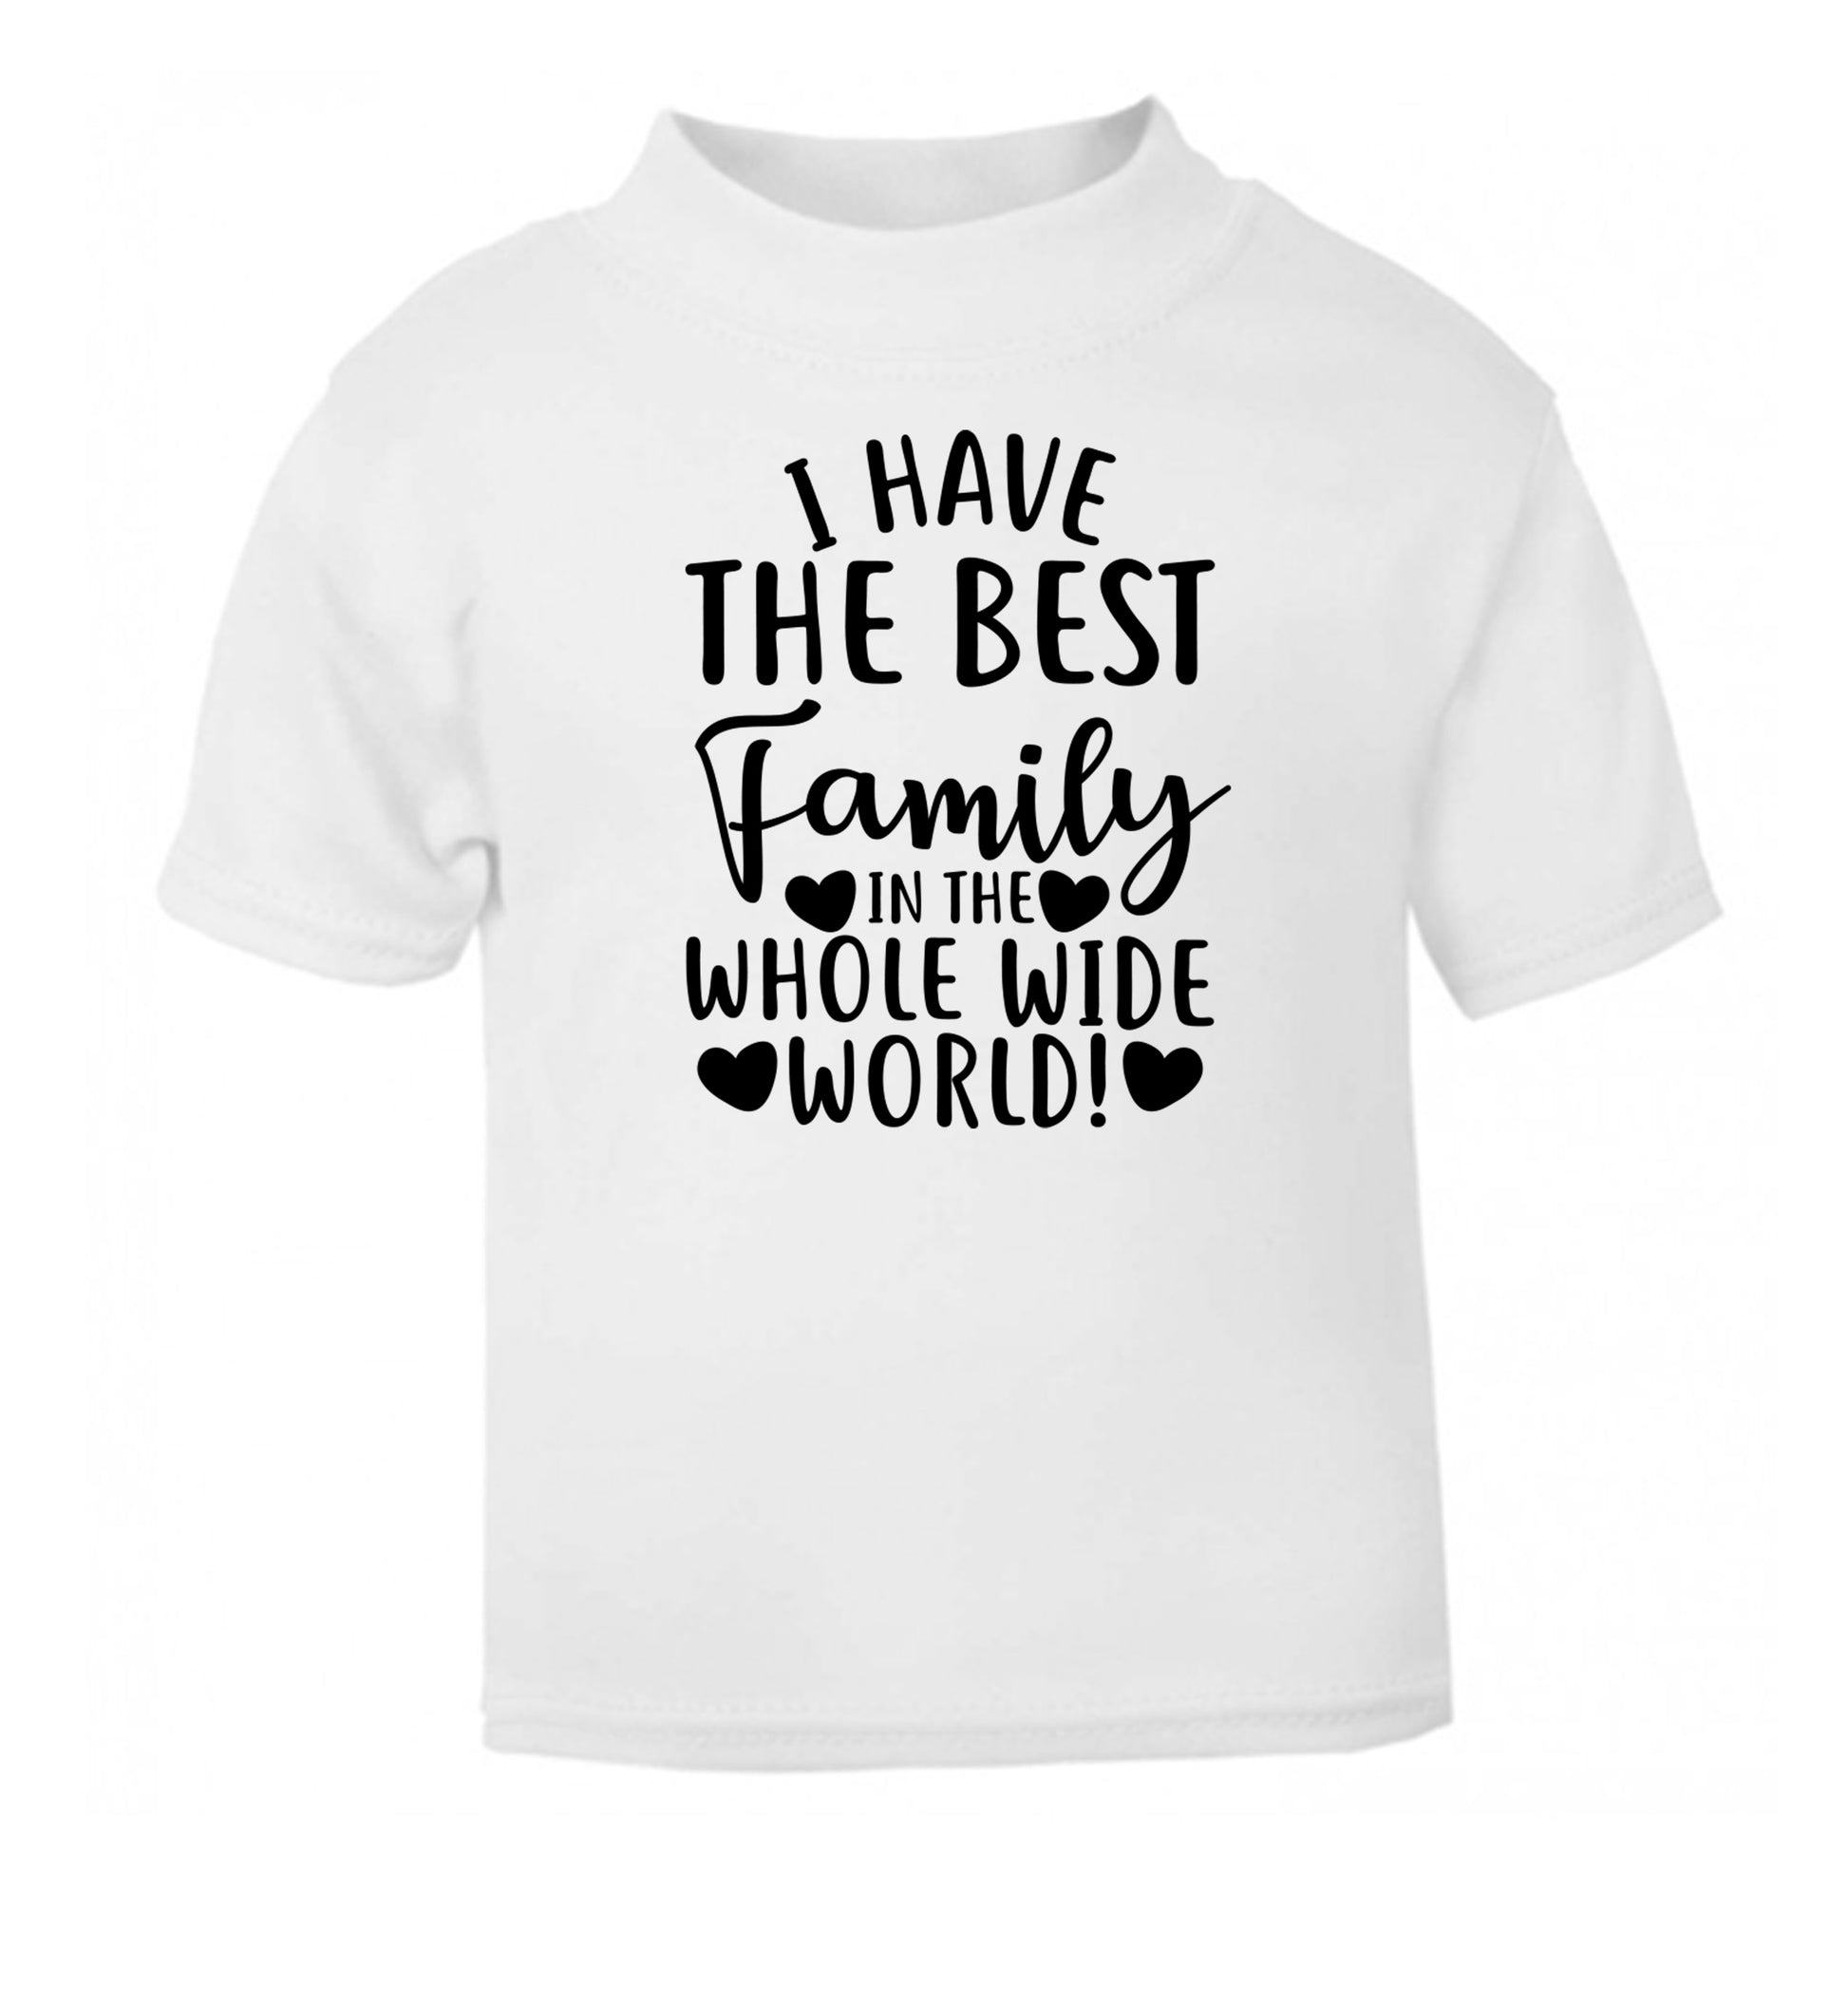 I have the best family in the whole wide world! white Baby Toddler Tshirt 2 Years